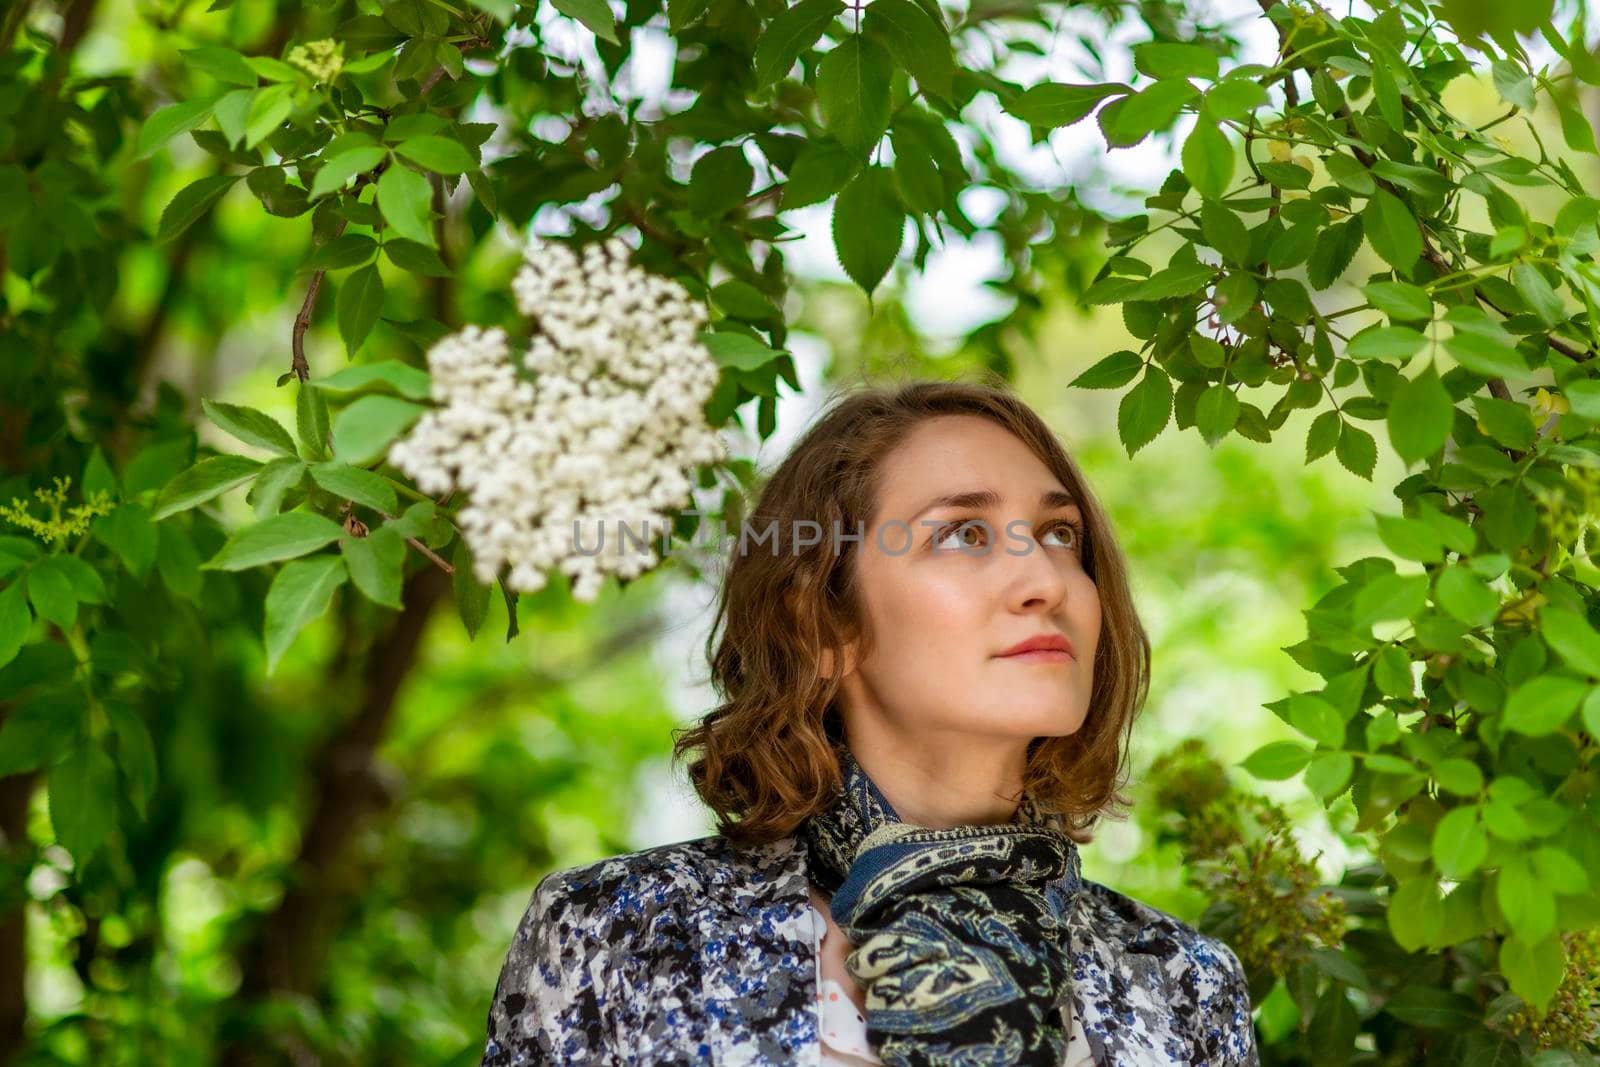 Young woman poses among the plants, looking at one of them.